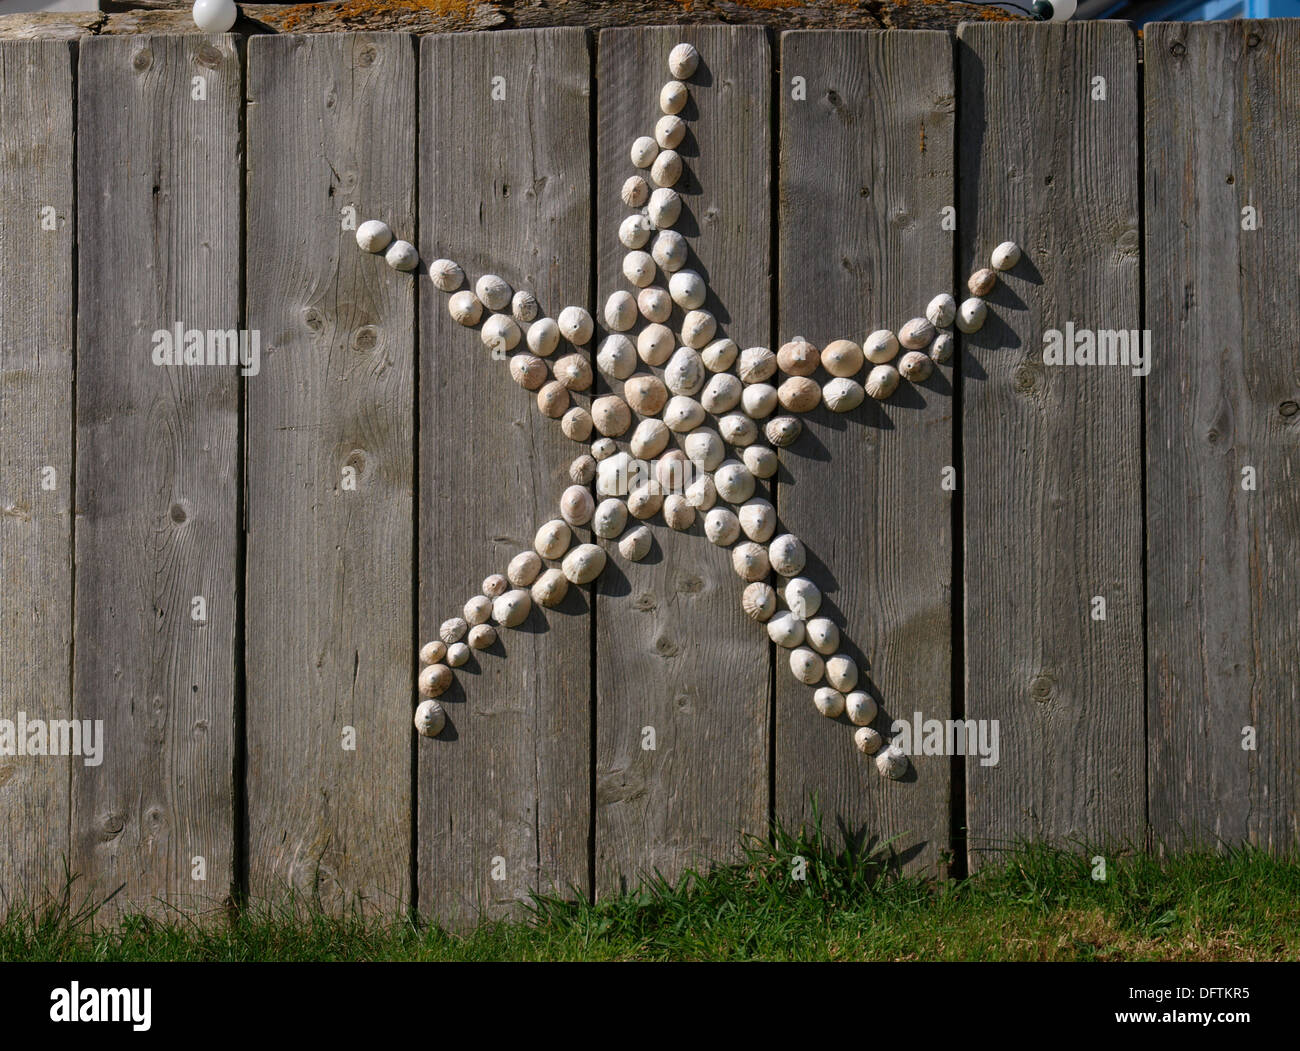 Limpet shells used to decorate a fence in the shape of a starfish, Widemouth Bay, Bude, Cornwall, UK Stock Photo